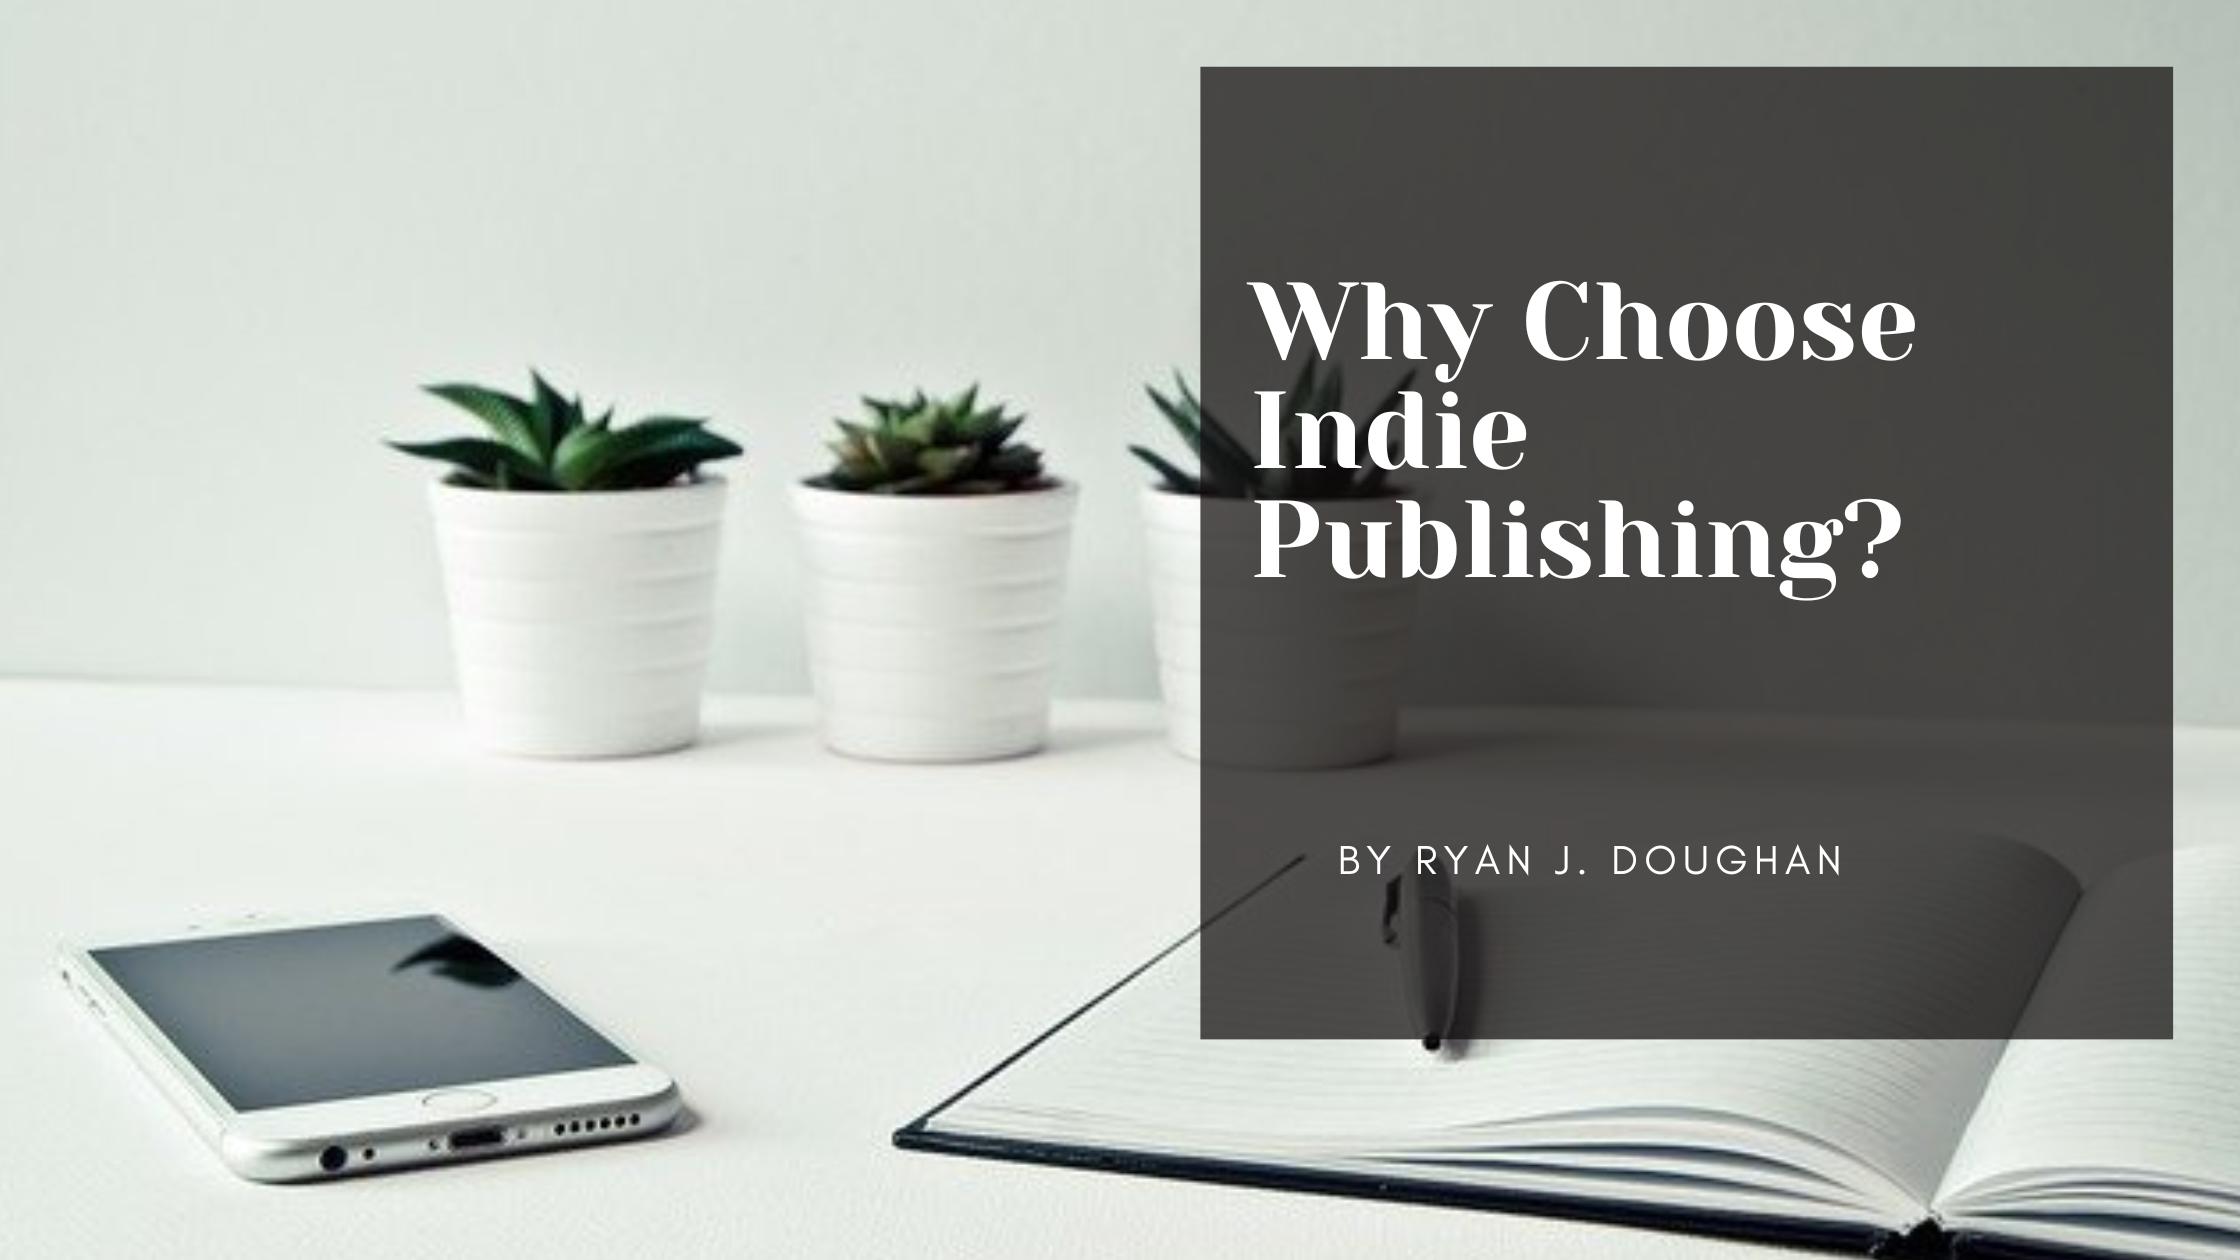 Why Choose Indie Publishing?